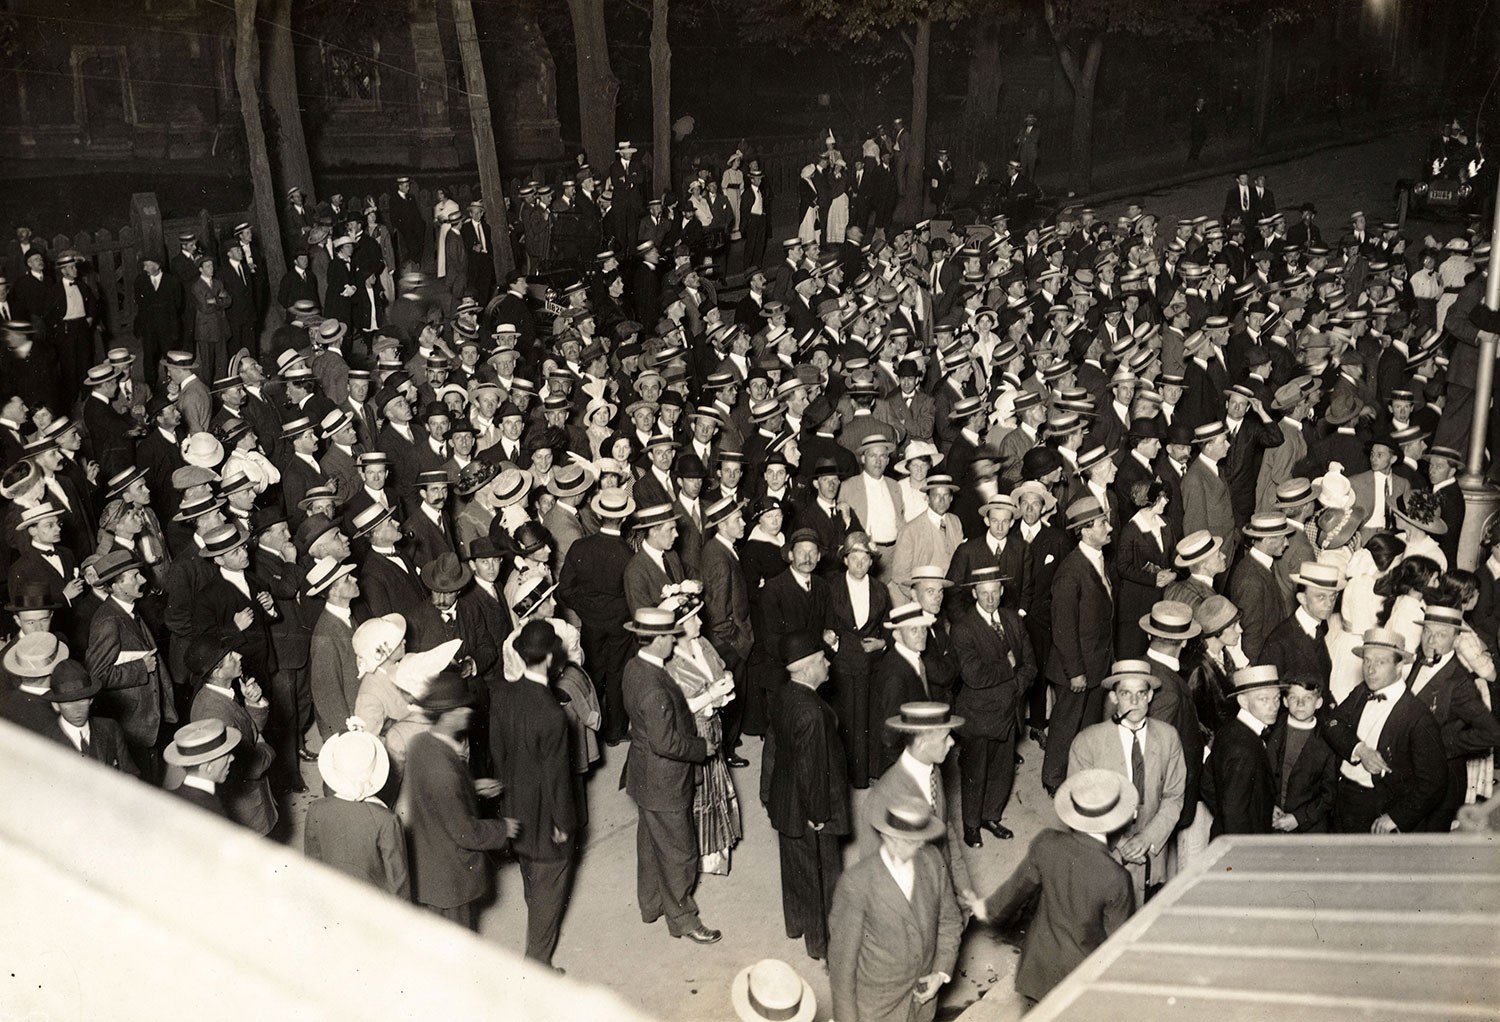 “War declared!” Scene outside the Toronto Star office at midnight on August 4, 1914. Photo: Queen’s University Archives, A.A Chesterfield fonds.